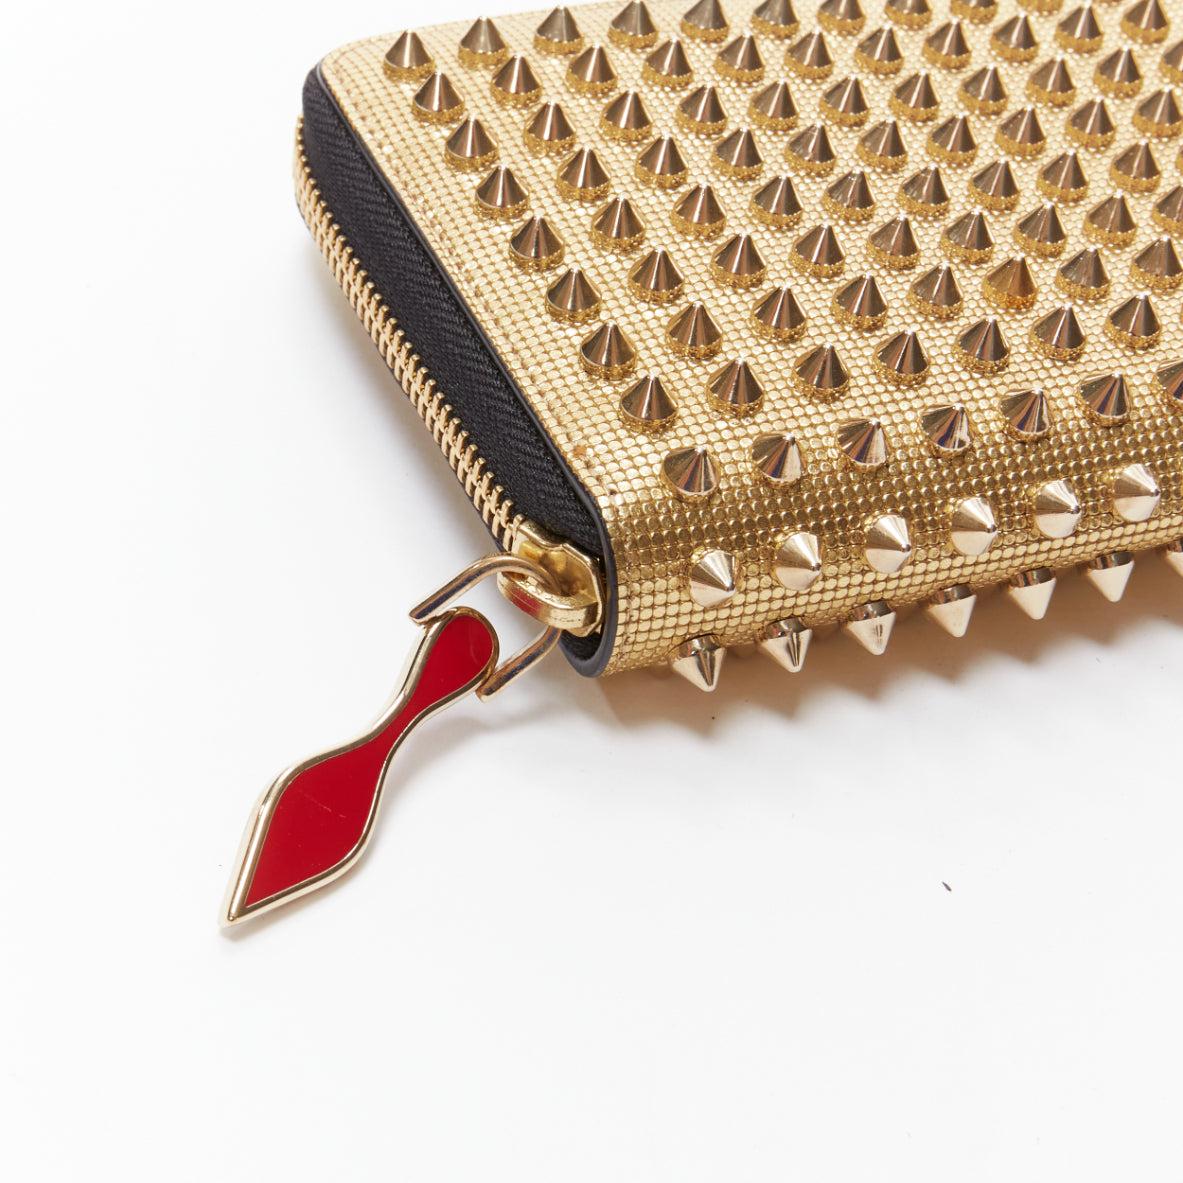 CHRISTIAN LOUBOUTIN Panettone gold studded leather zip around long wallet
Reference: TGAS/D00652
Brand: Christian louboutin
Material: Leather
Color: Gold
Pattern: Solid
Closure: Zip
Lining: Red Leather
Extra Details: Zip-around fastening, metallic